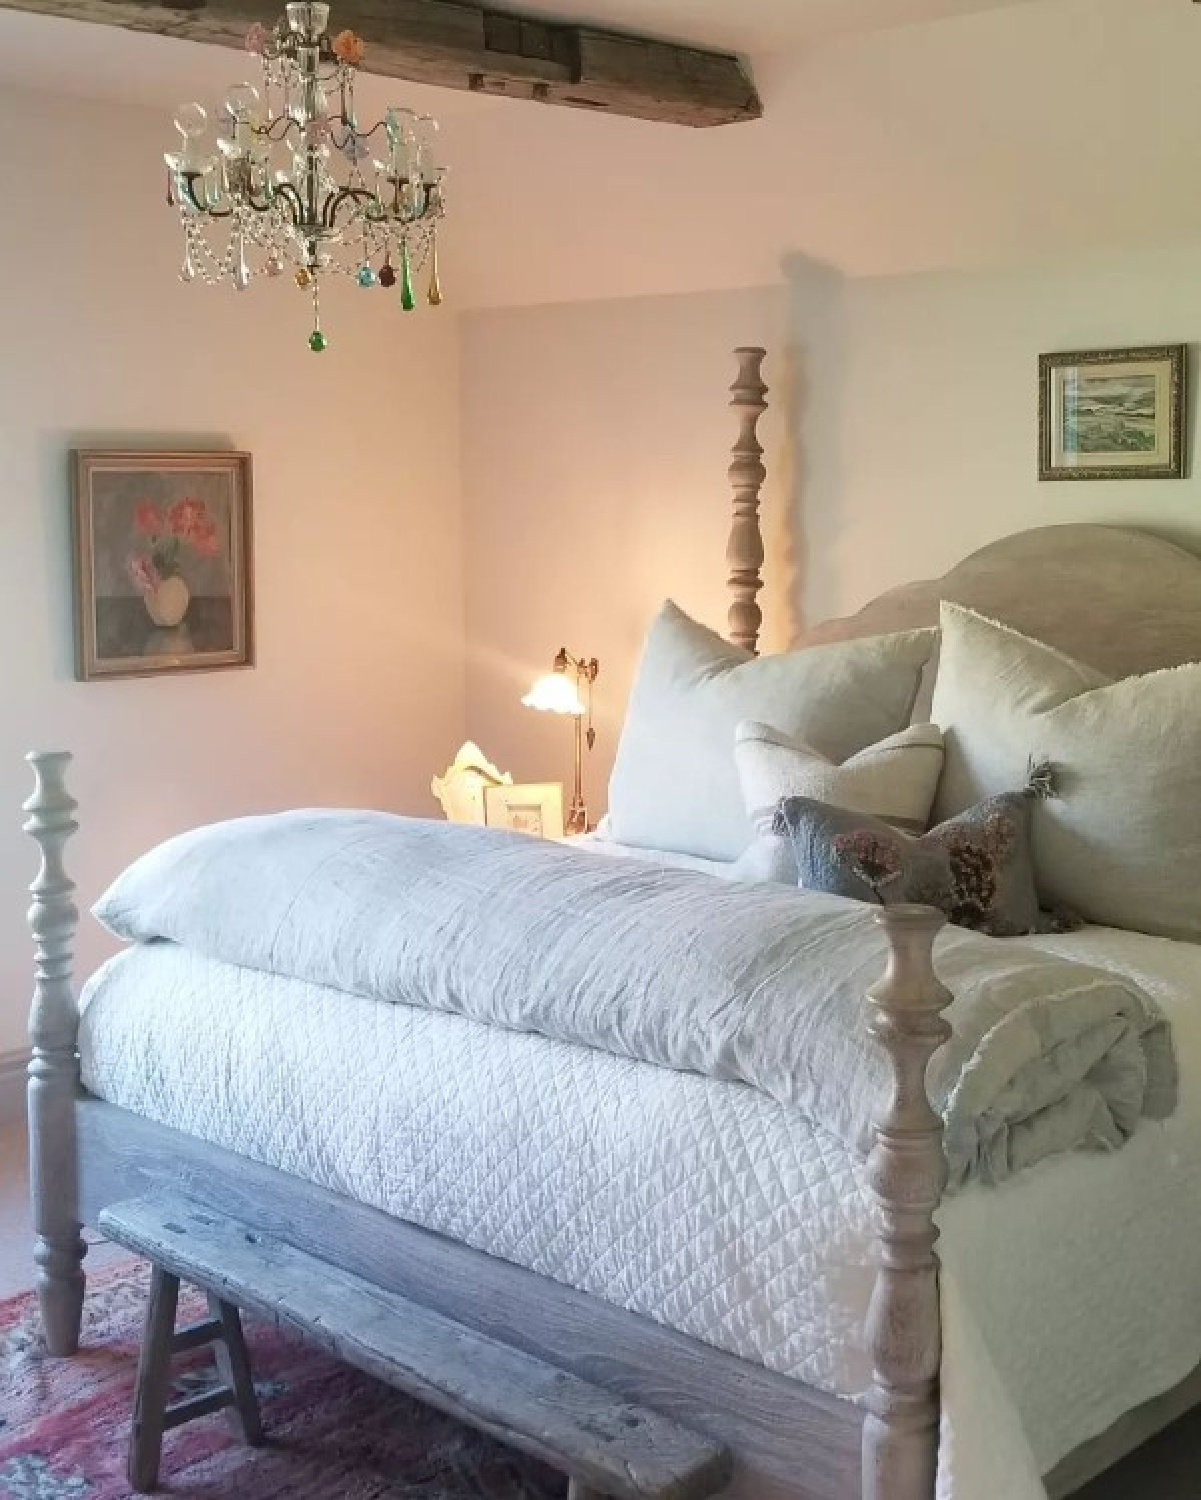 Romantic European country bedroom with poster bed, rustic wood ceilings, vintage chandelier, and pale sumptuous bedding - @beljarhome. #romanticbedrooms #europeancountrystyle